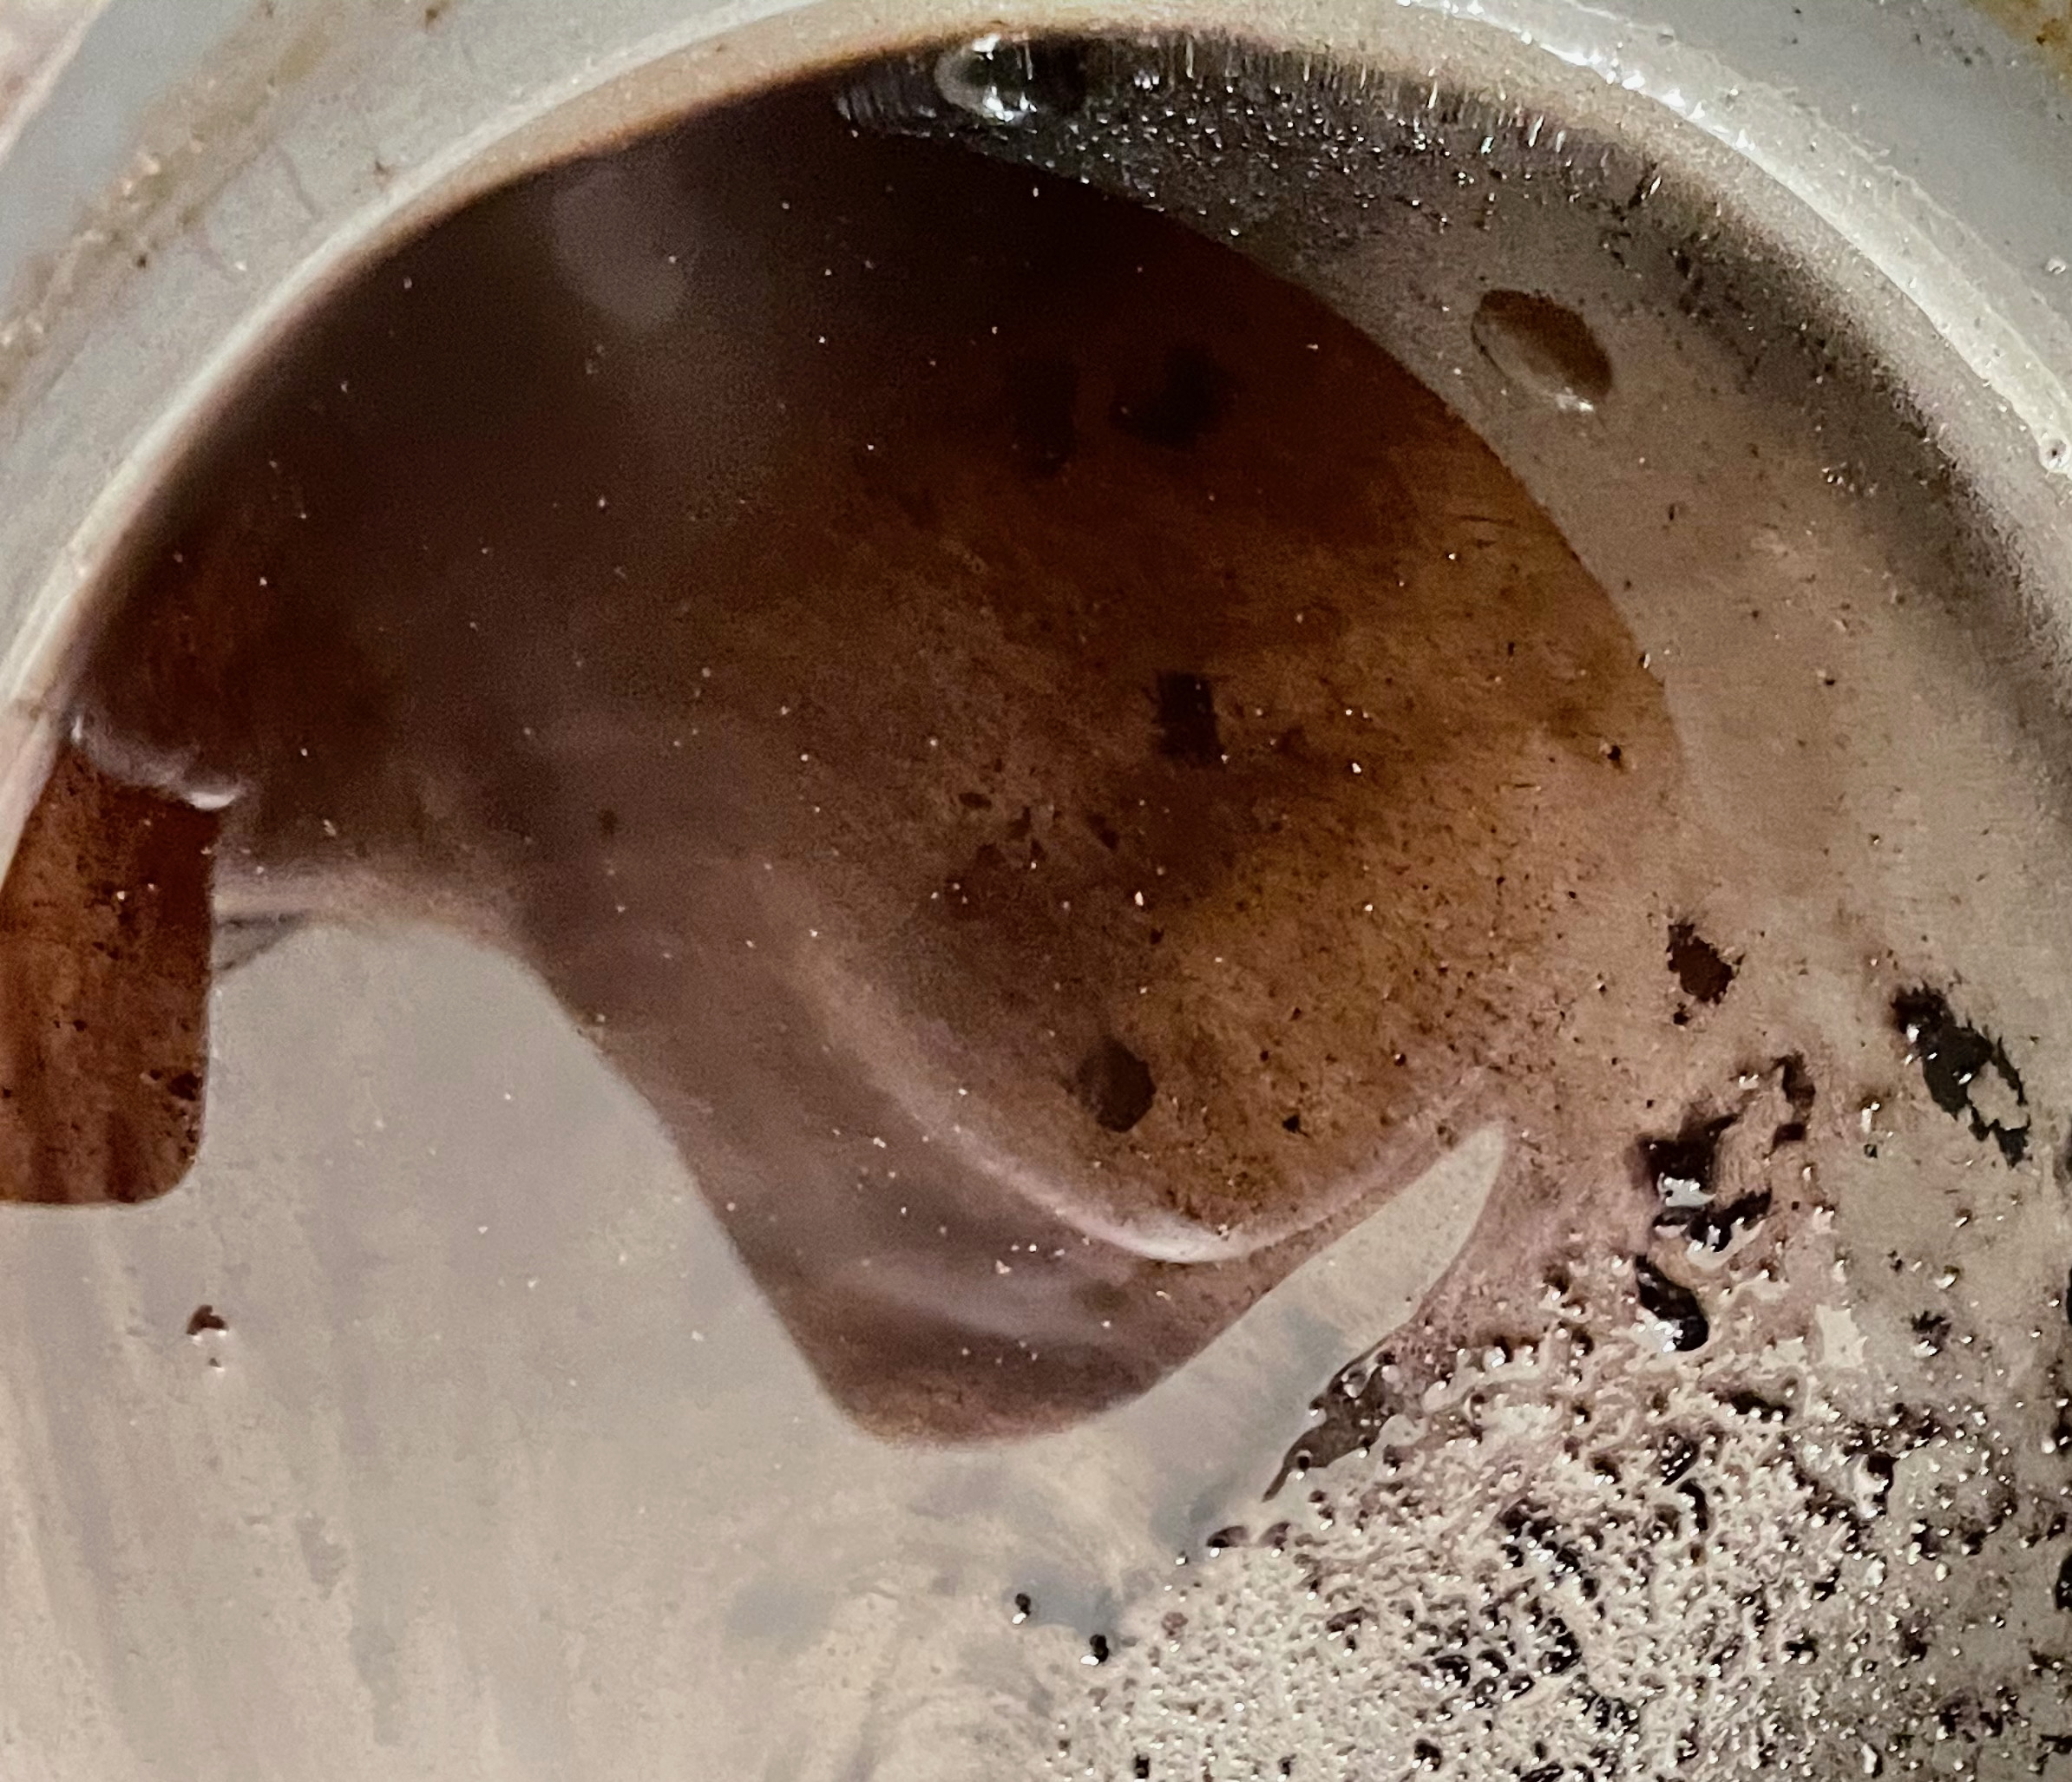 torso reflected in a pot of grease, making the image abstracted so it's difficult to tell what body parts are being depicted